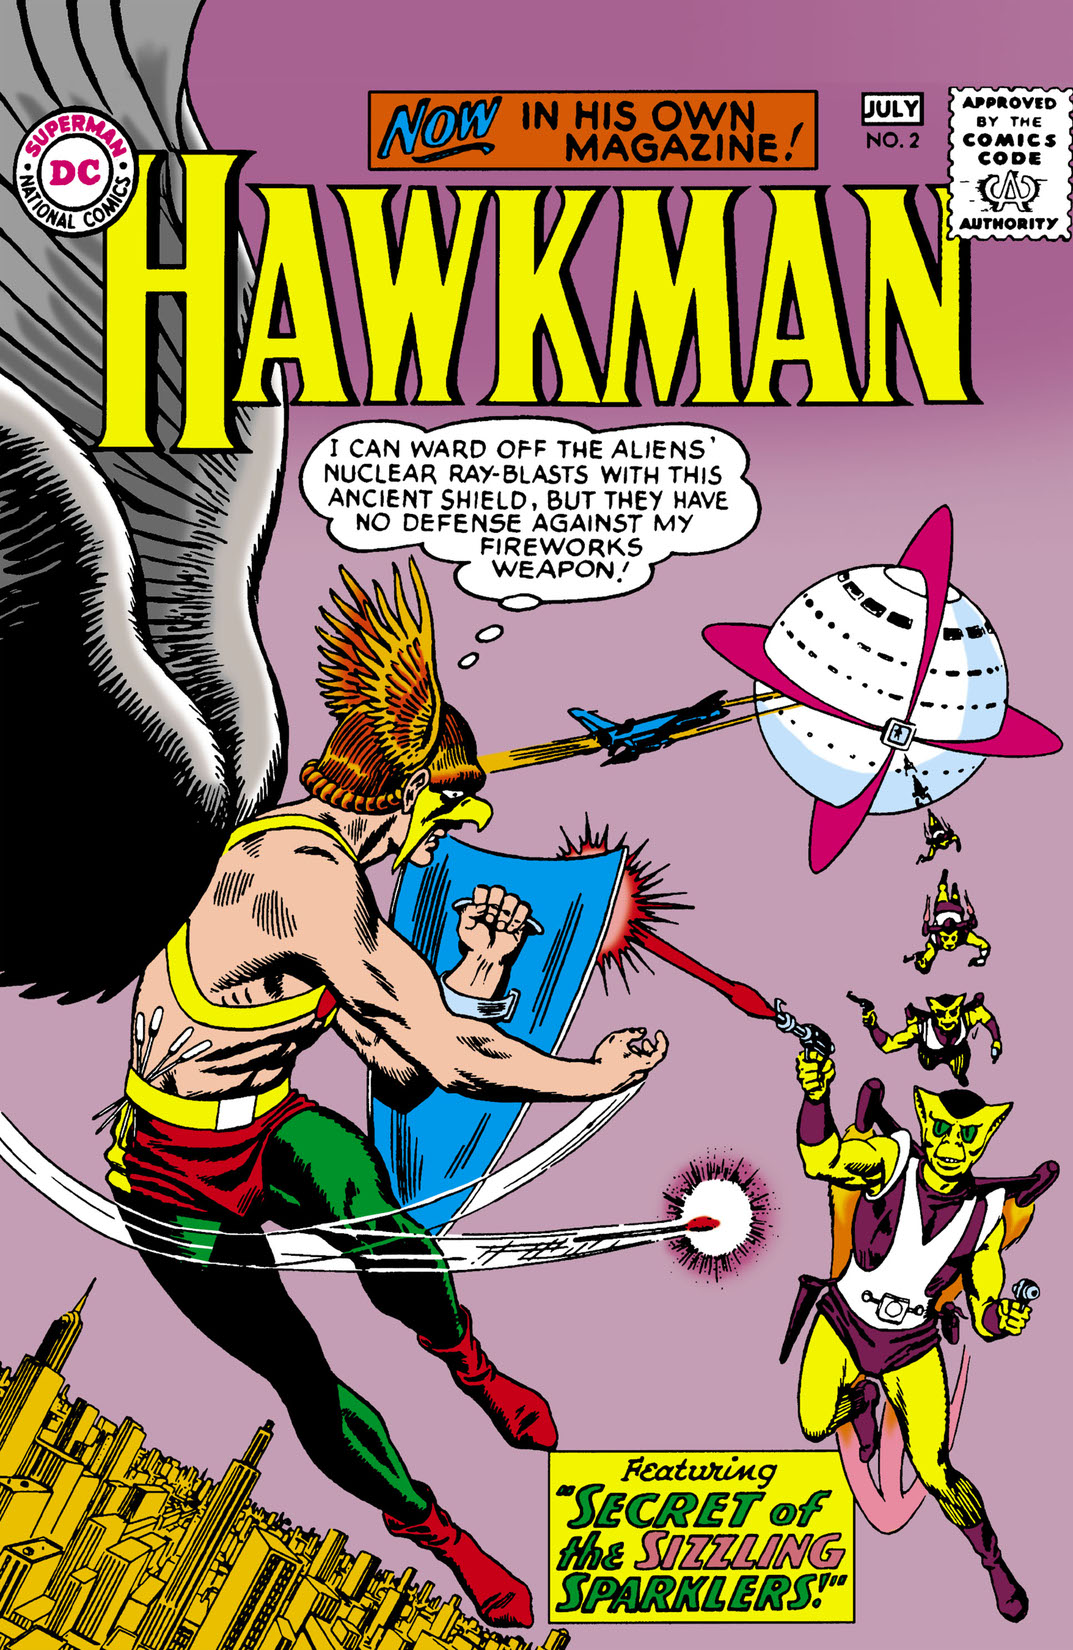 Hawkman (1964-) #2 preview images